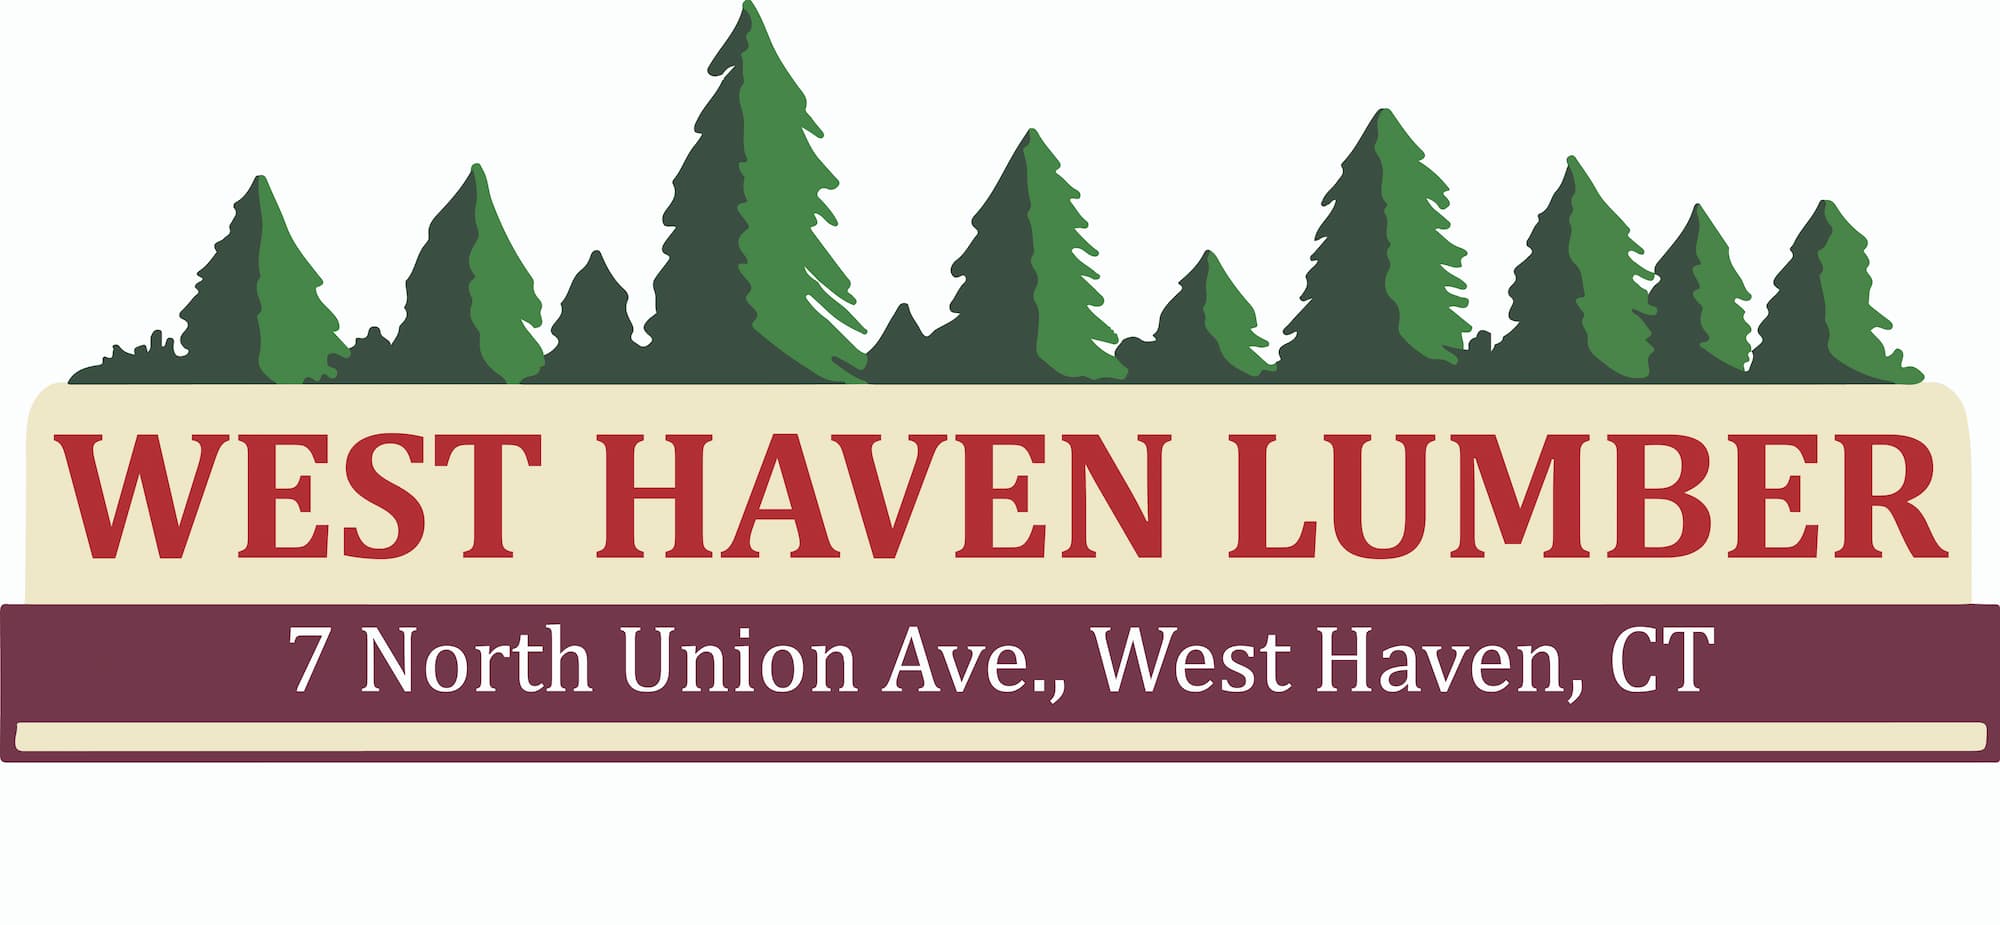 NEW logo for West Haven Lumber